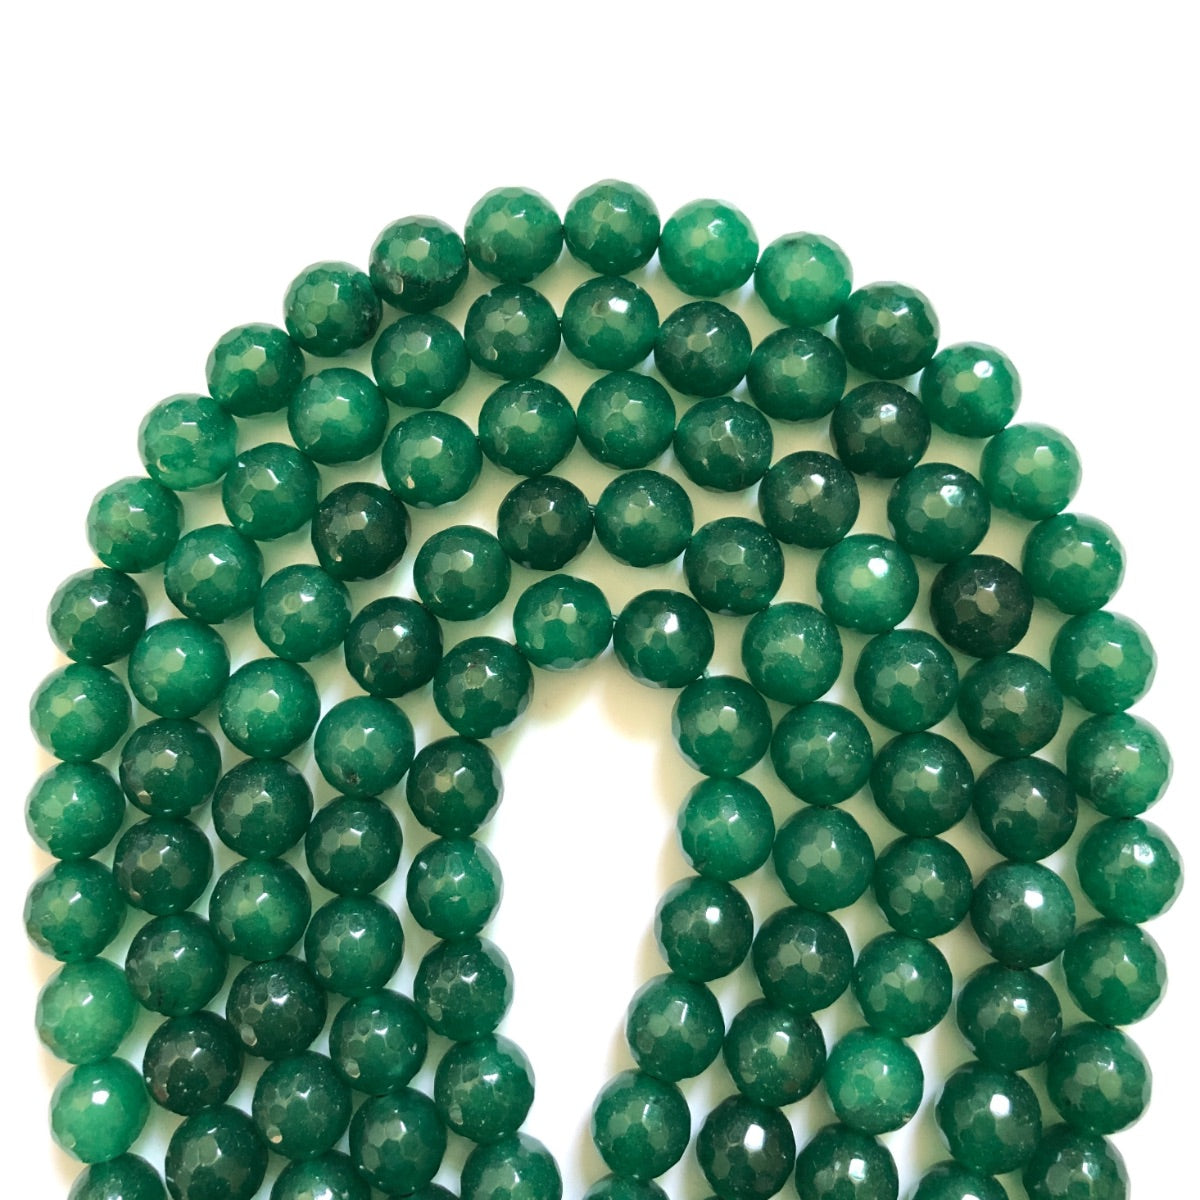 2 Strands/lot 12mm Green Faceted Jade Stone Beads Stone Beads 12mm Stone Beads Faceted Jade Beads New Beads Arrivals Charms Beads Beyond